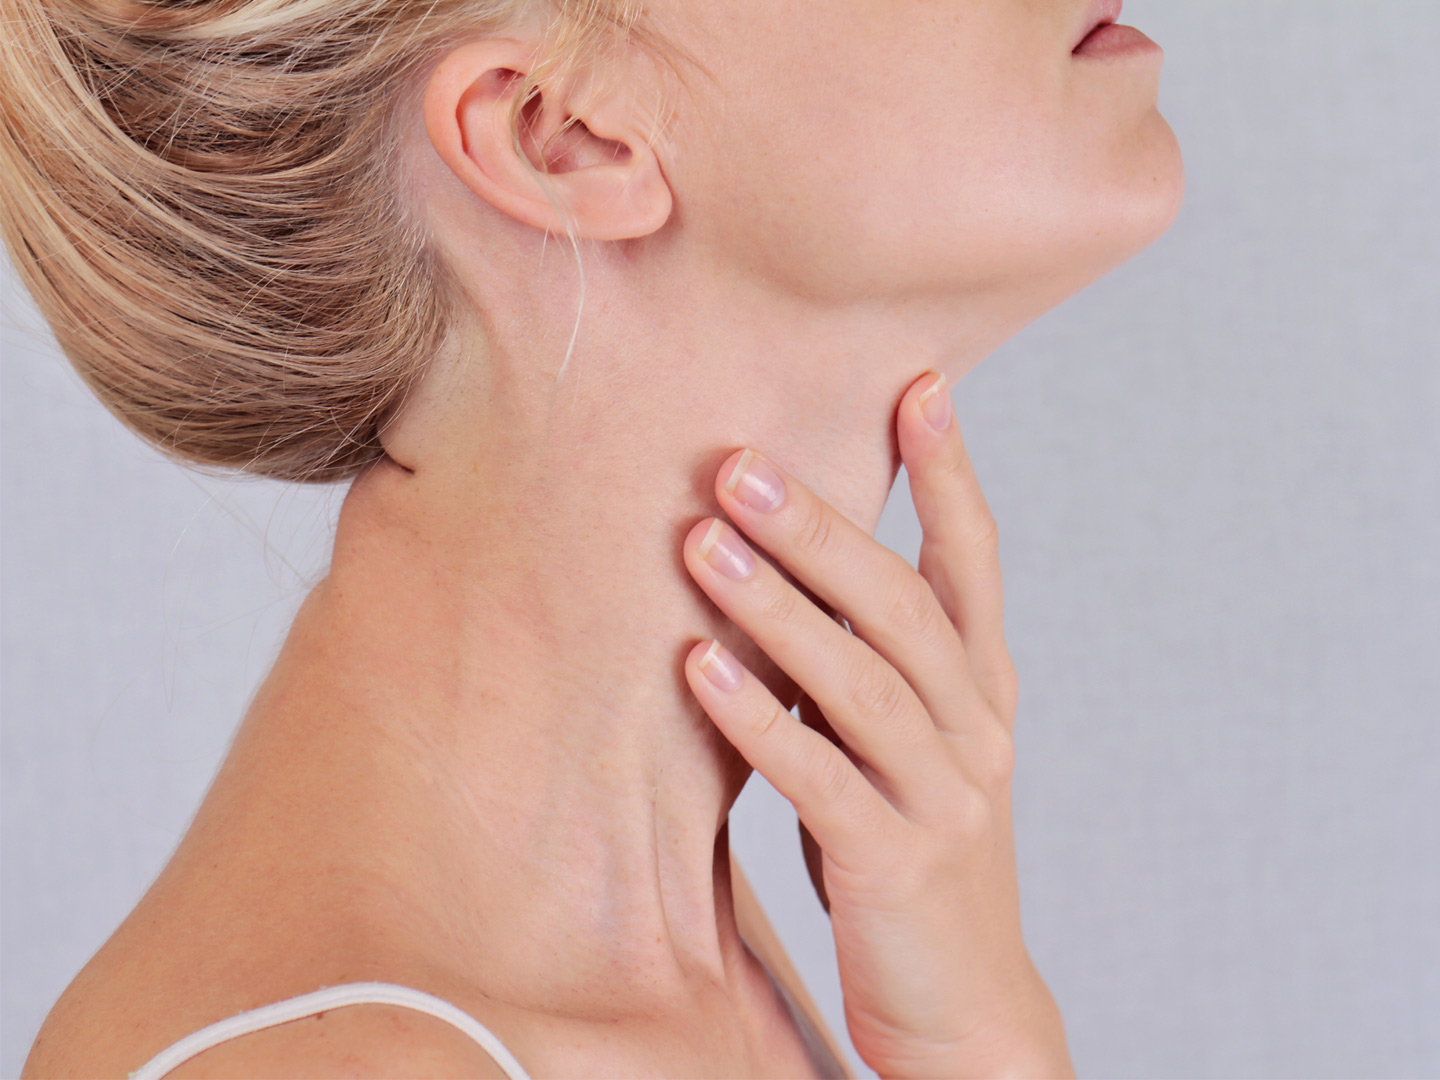 What are the Symptoms of Hypothyroidism and the Treatment for Hypothyroidism?